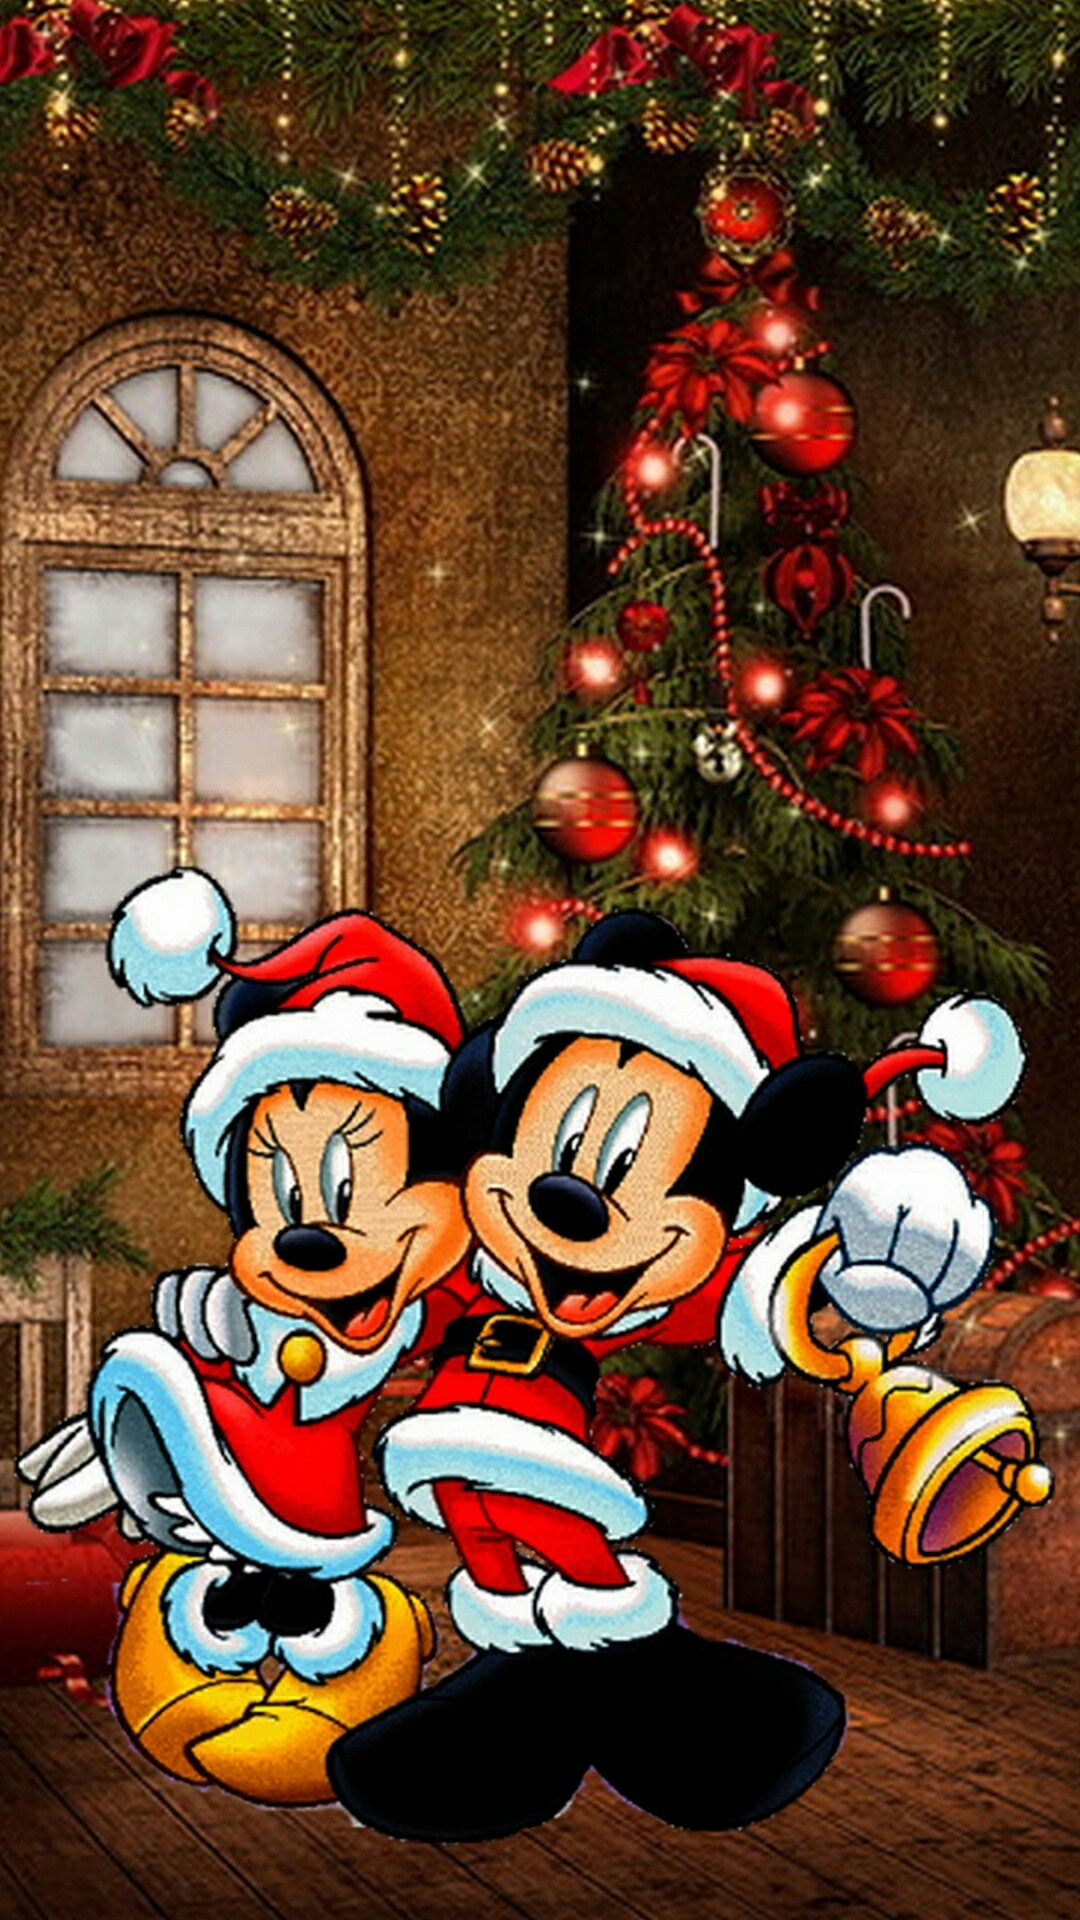 Holiday Wallpaper, Wallpaper Backgrounds, Walt Disney - Mickey Mouse Christmas Background - HD Wallpaper 